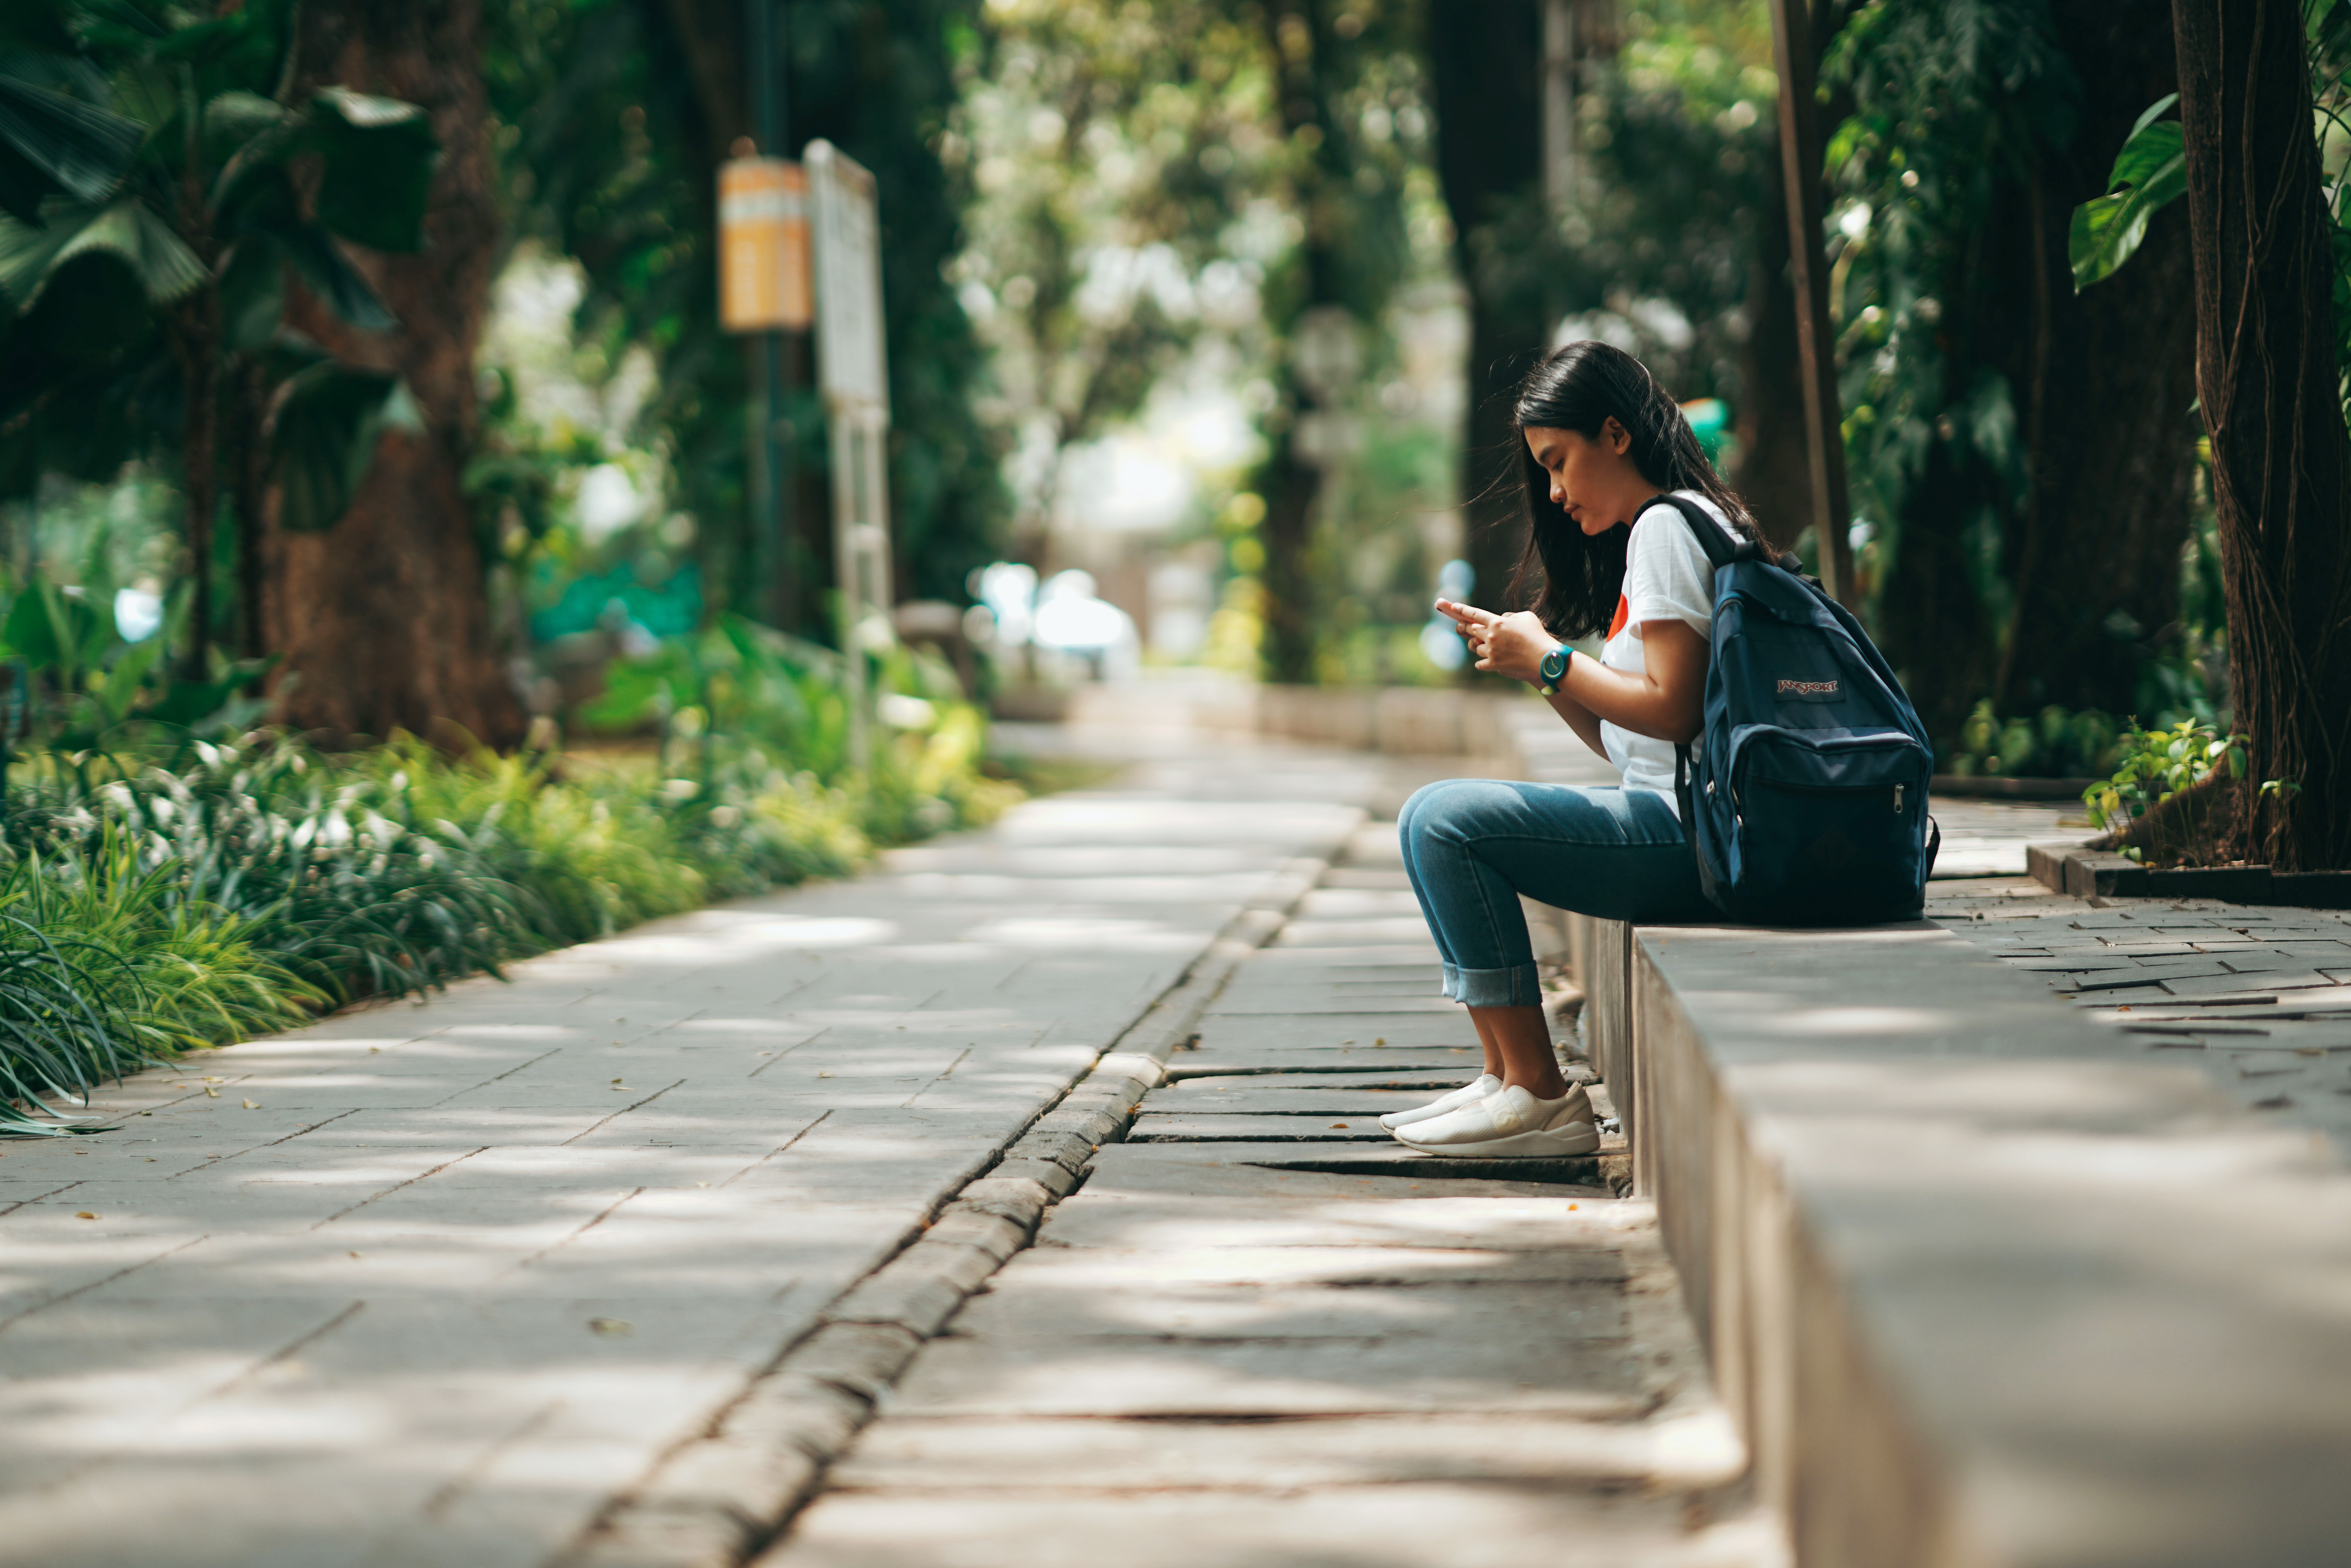 A woman sits on a concrete bench and looks at her phone.